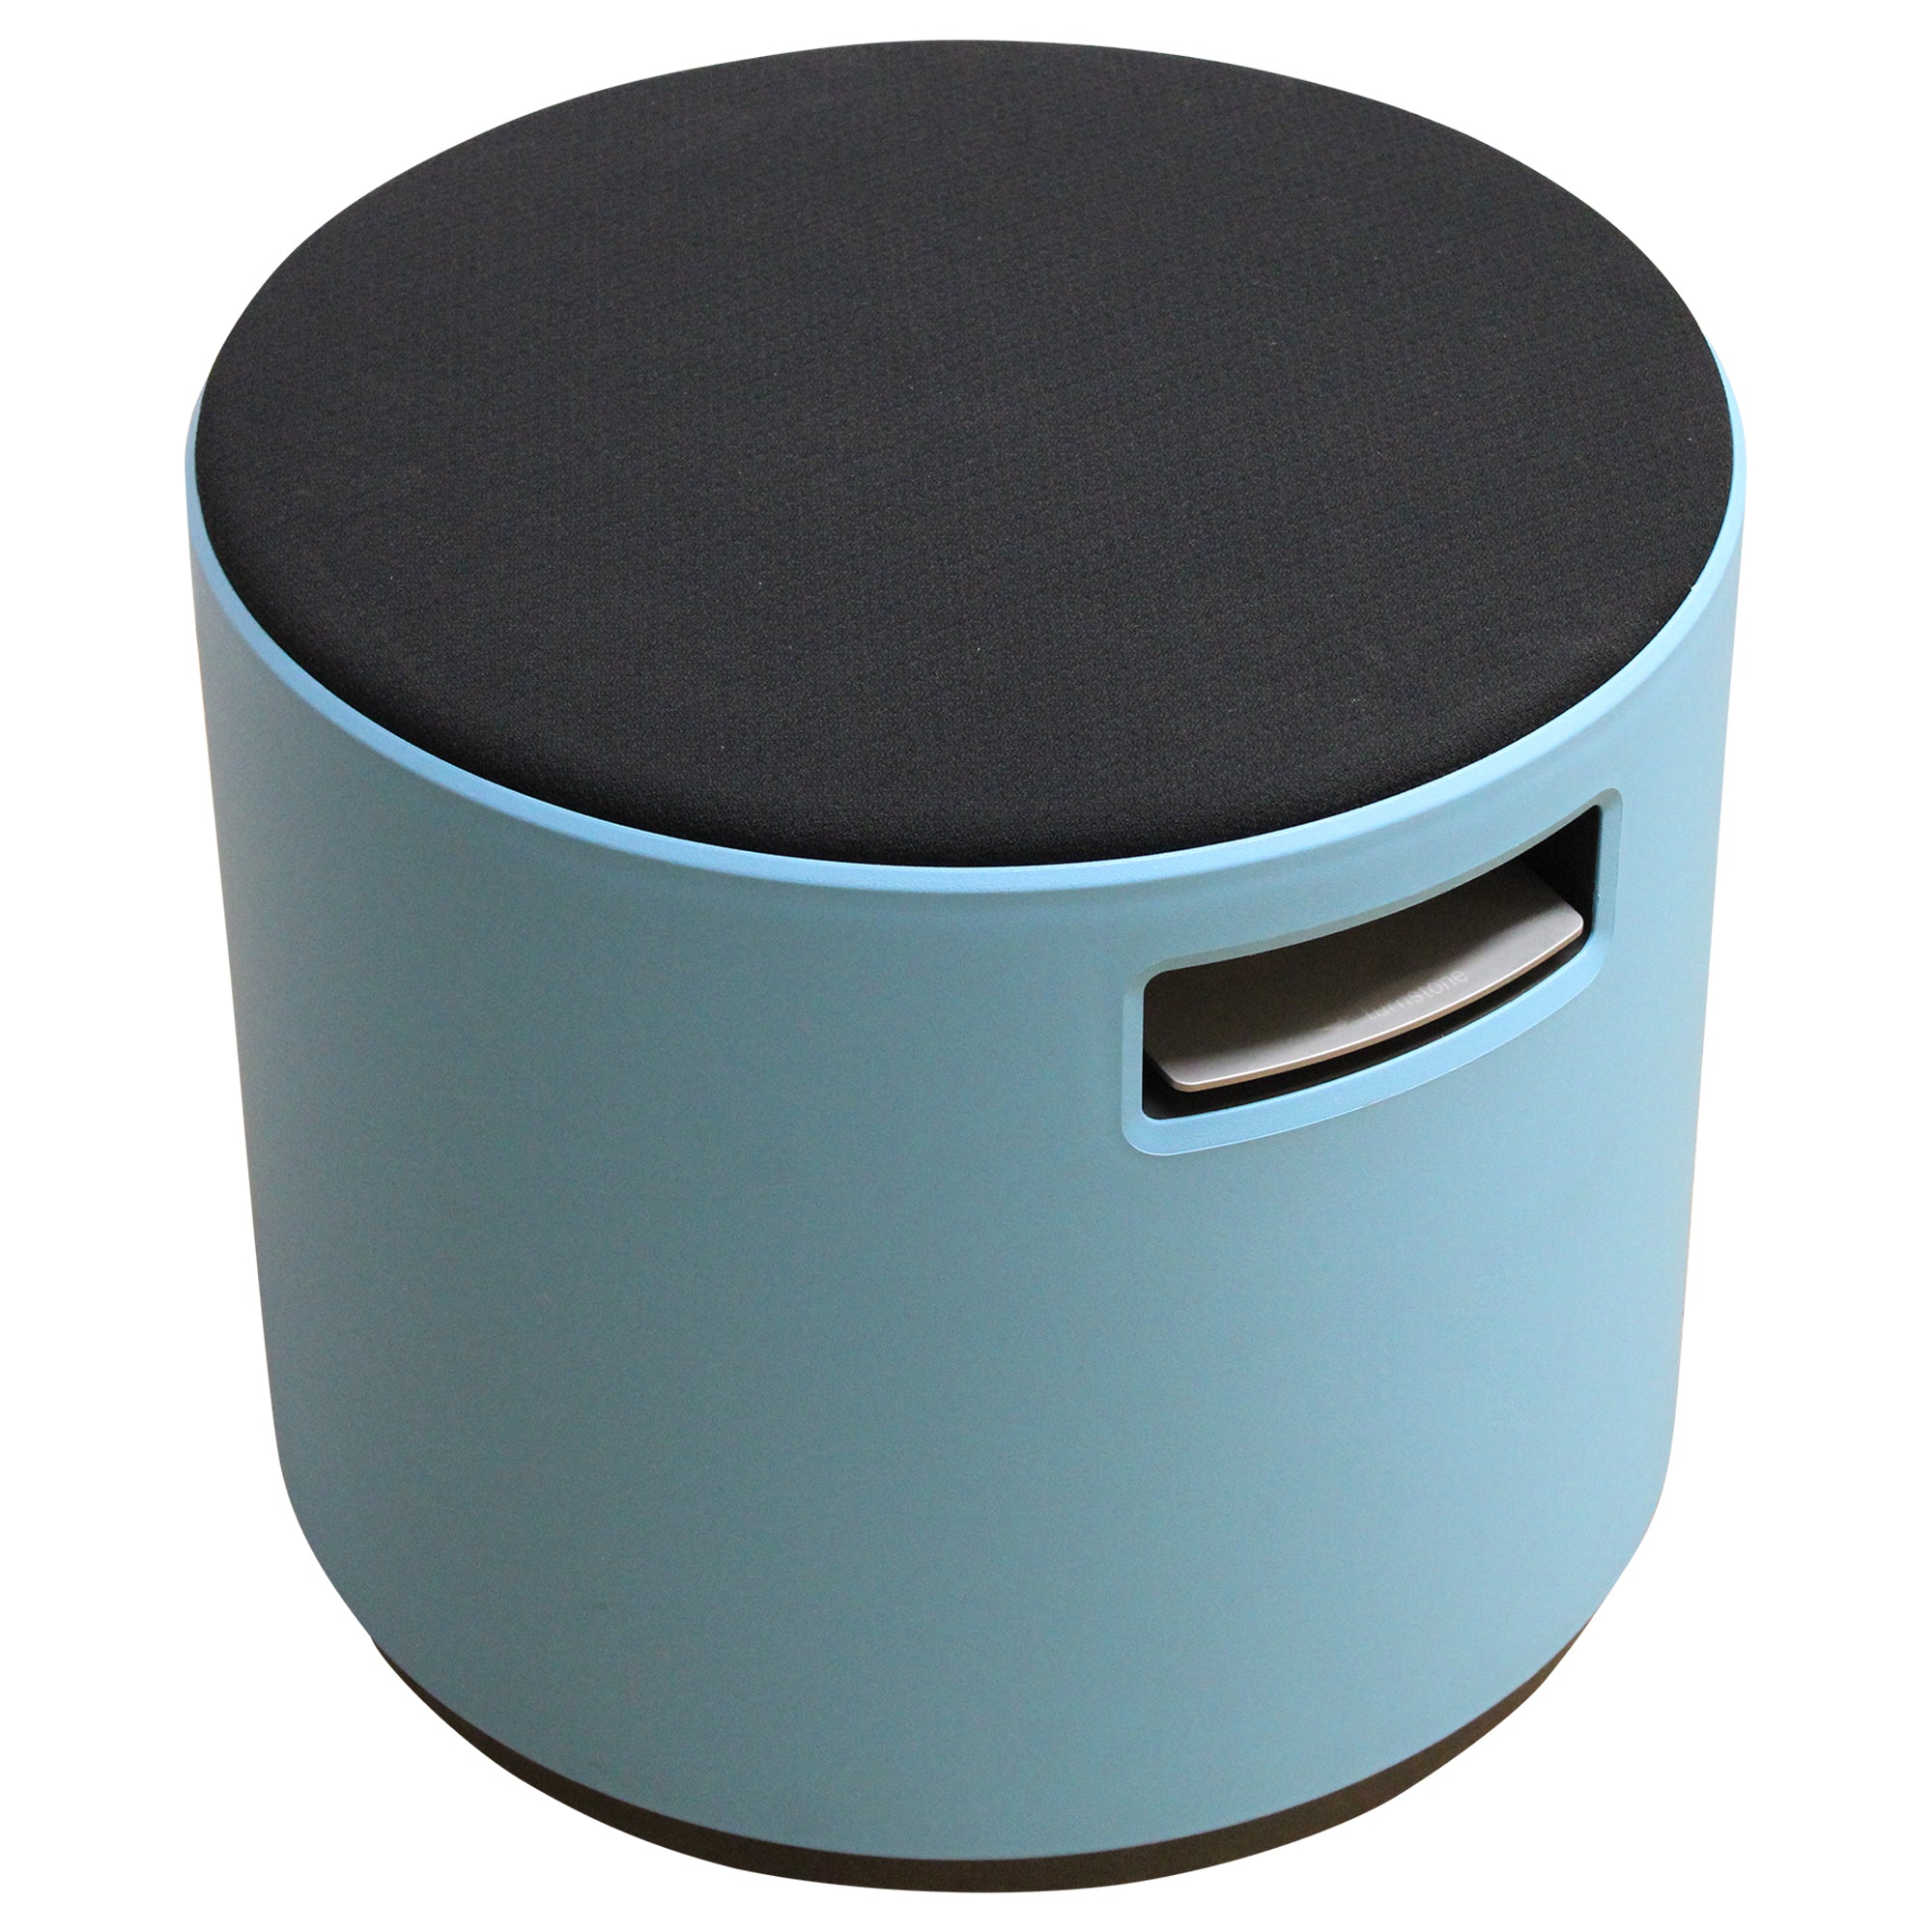 Turnstone Buoy Multifunctional Ottoman - Blue - Preowned